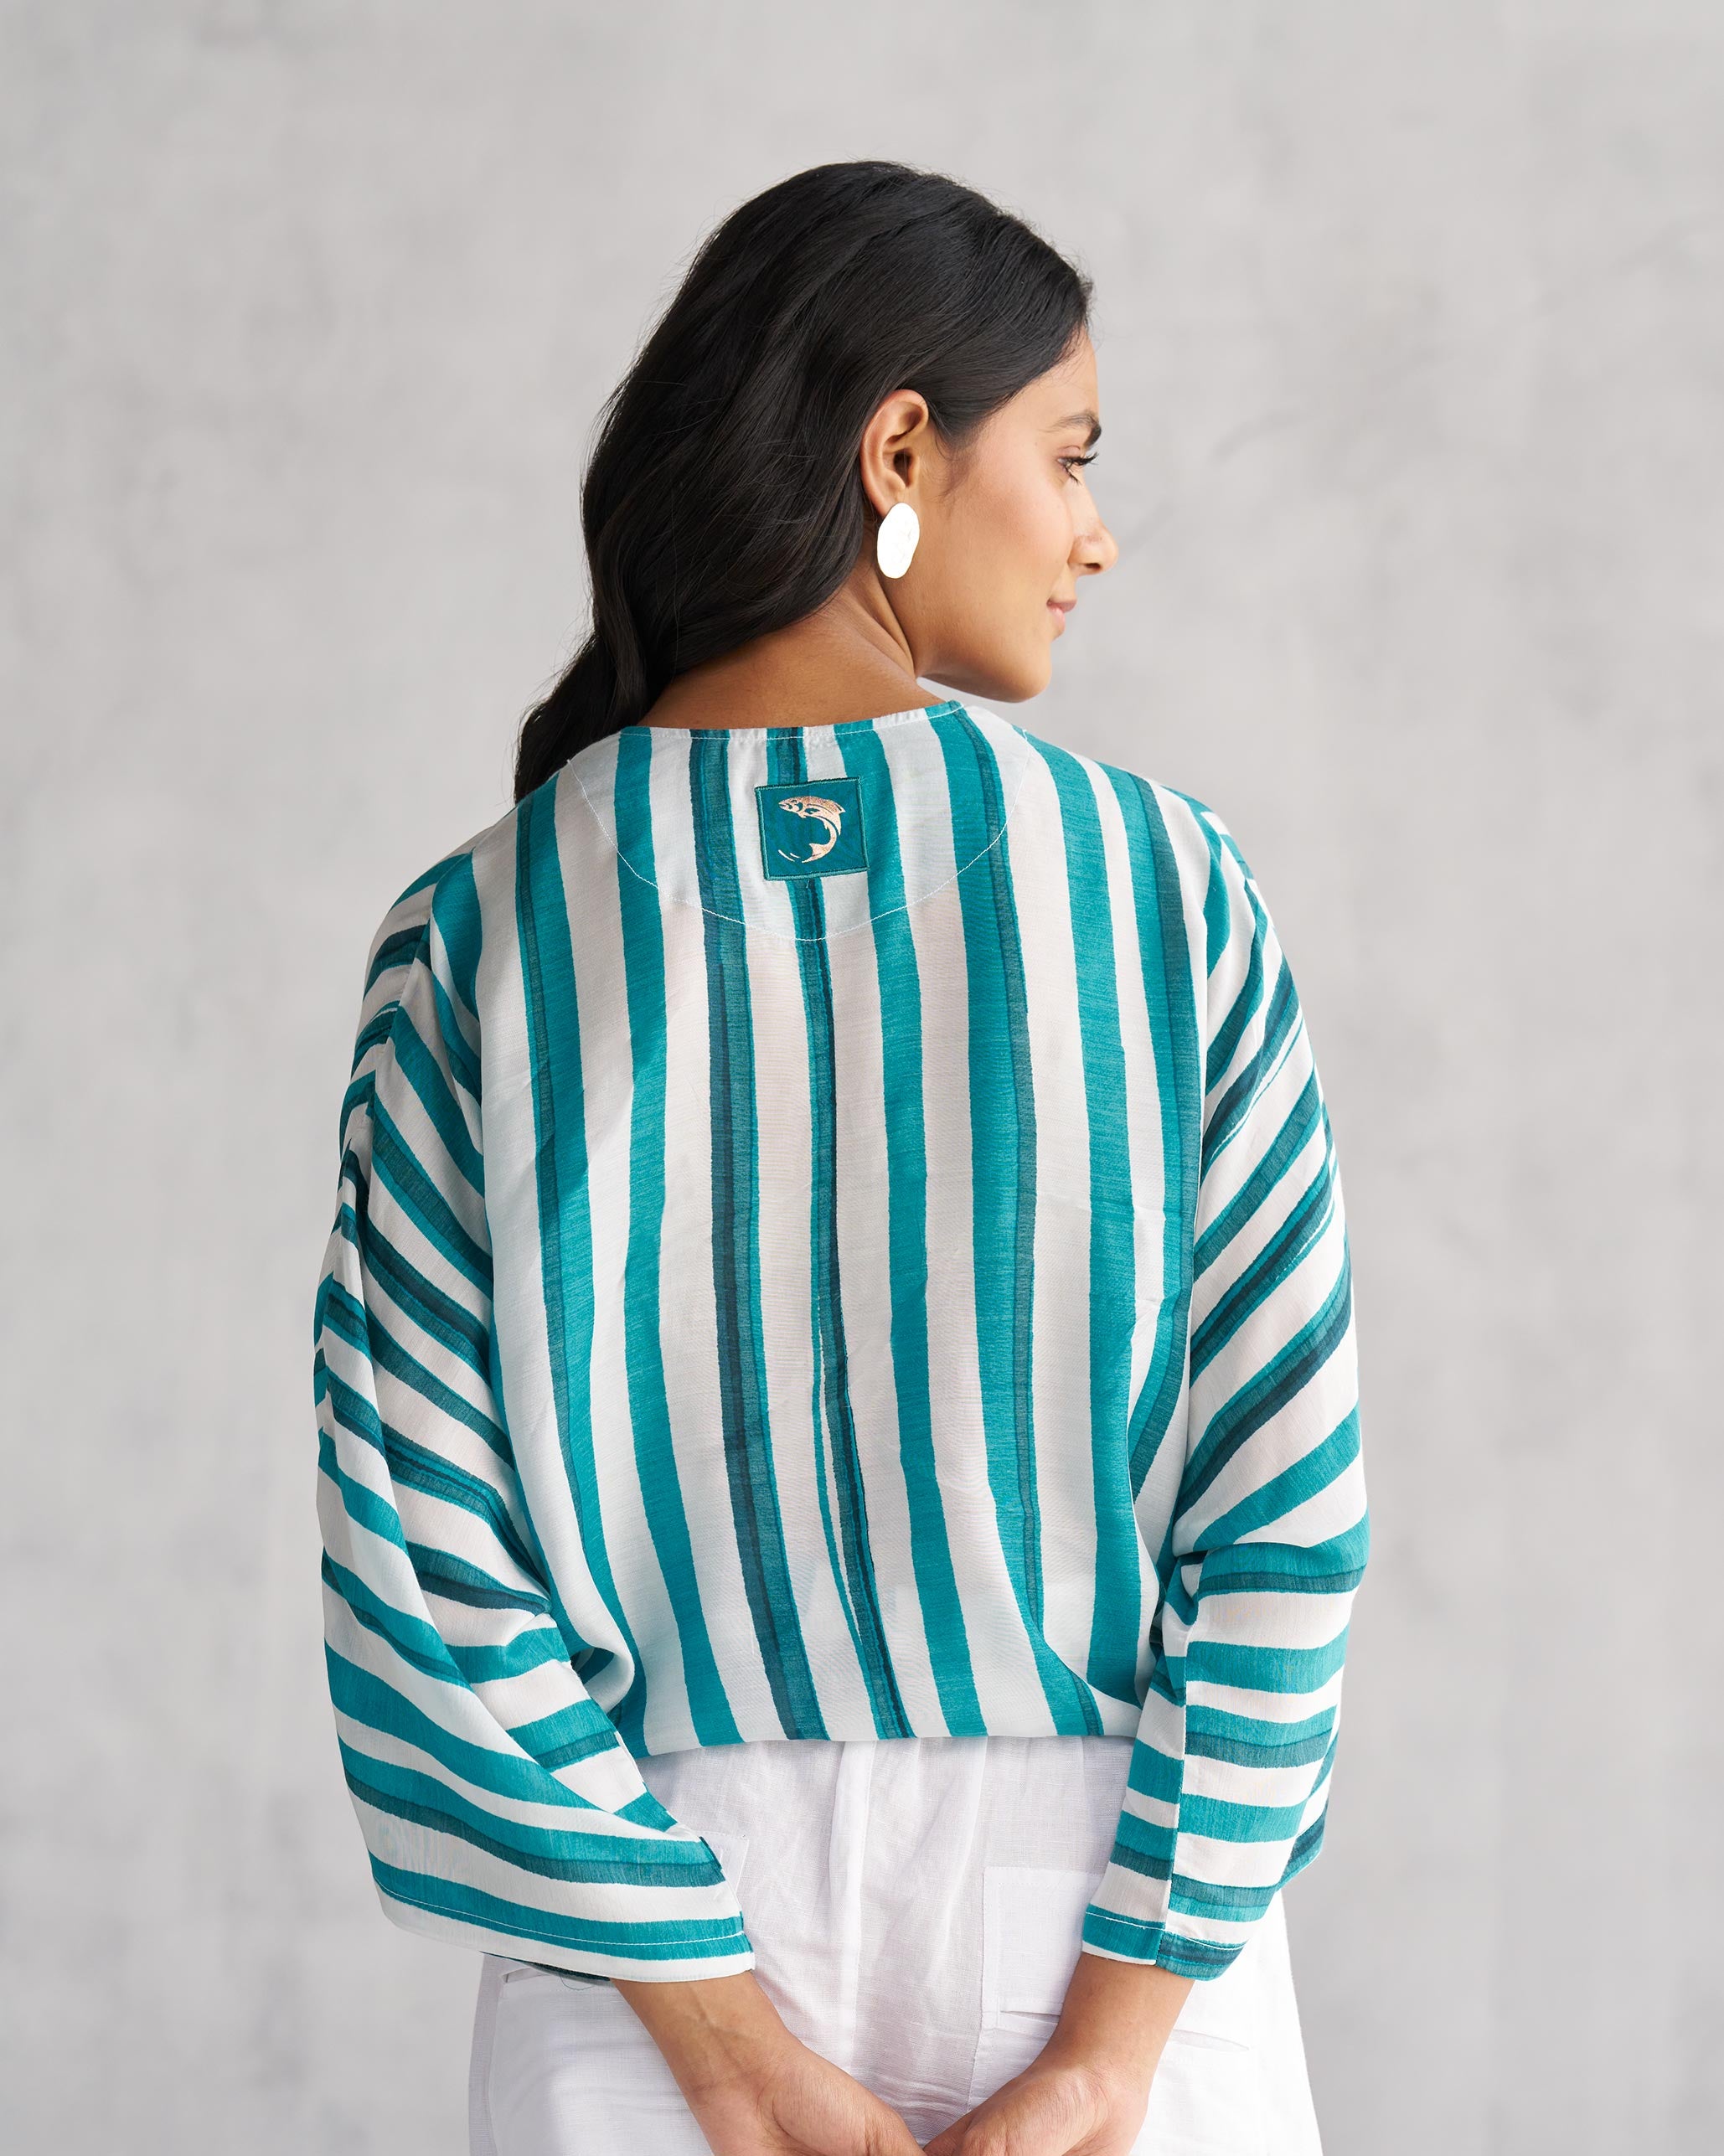 Front Knot Top - Teal & White Tssxnb